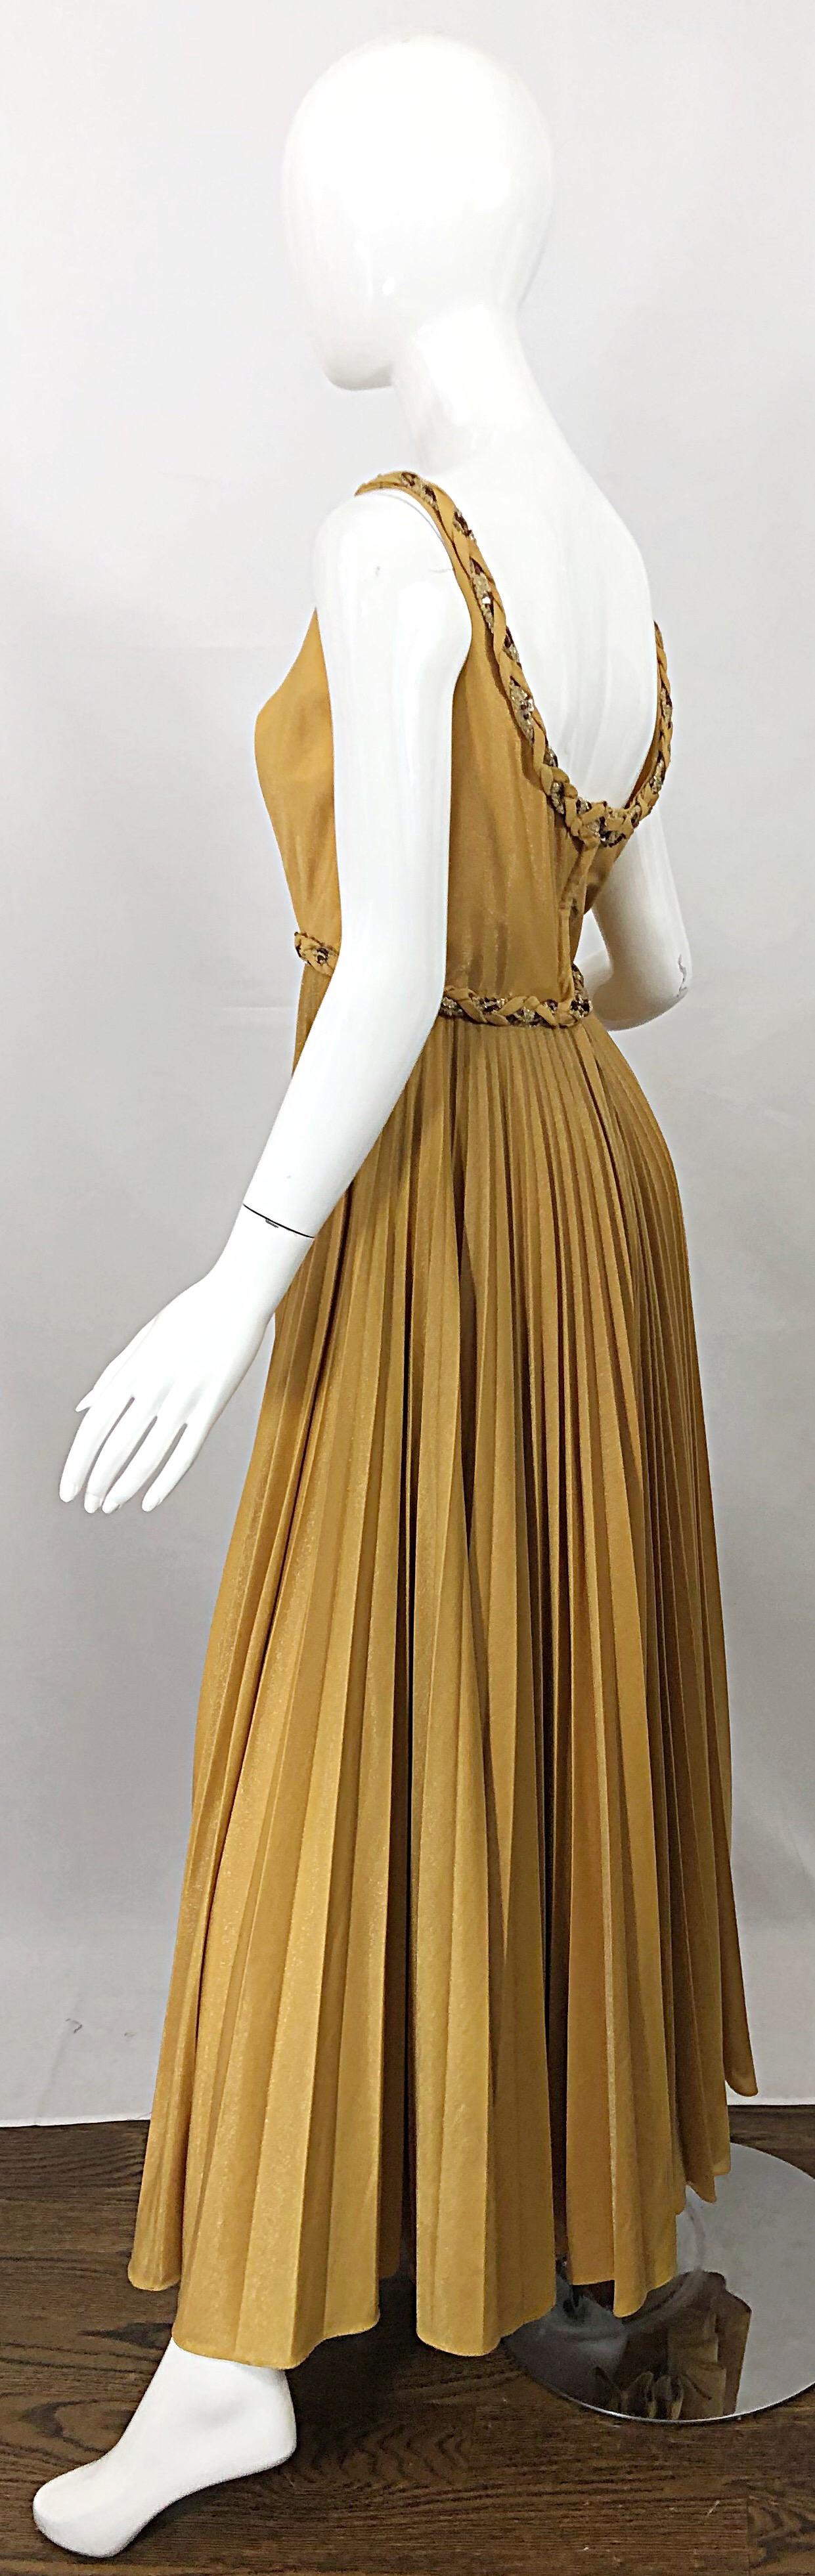 Emma Domb 1970s Gold Metallic Jersey Grecian Style Sequined Vintage 70s Gown For Sale 6